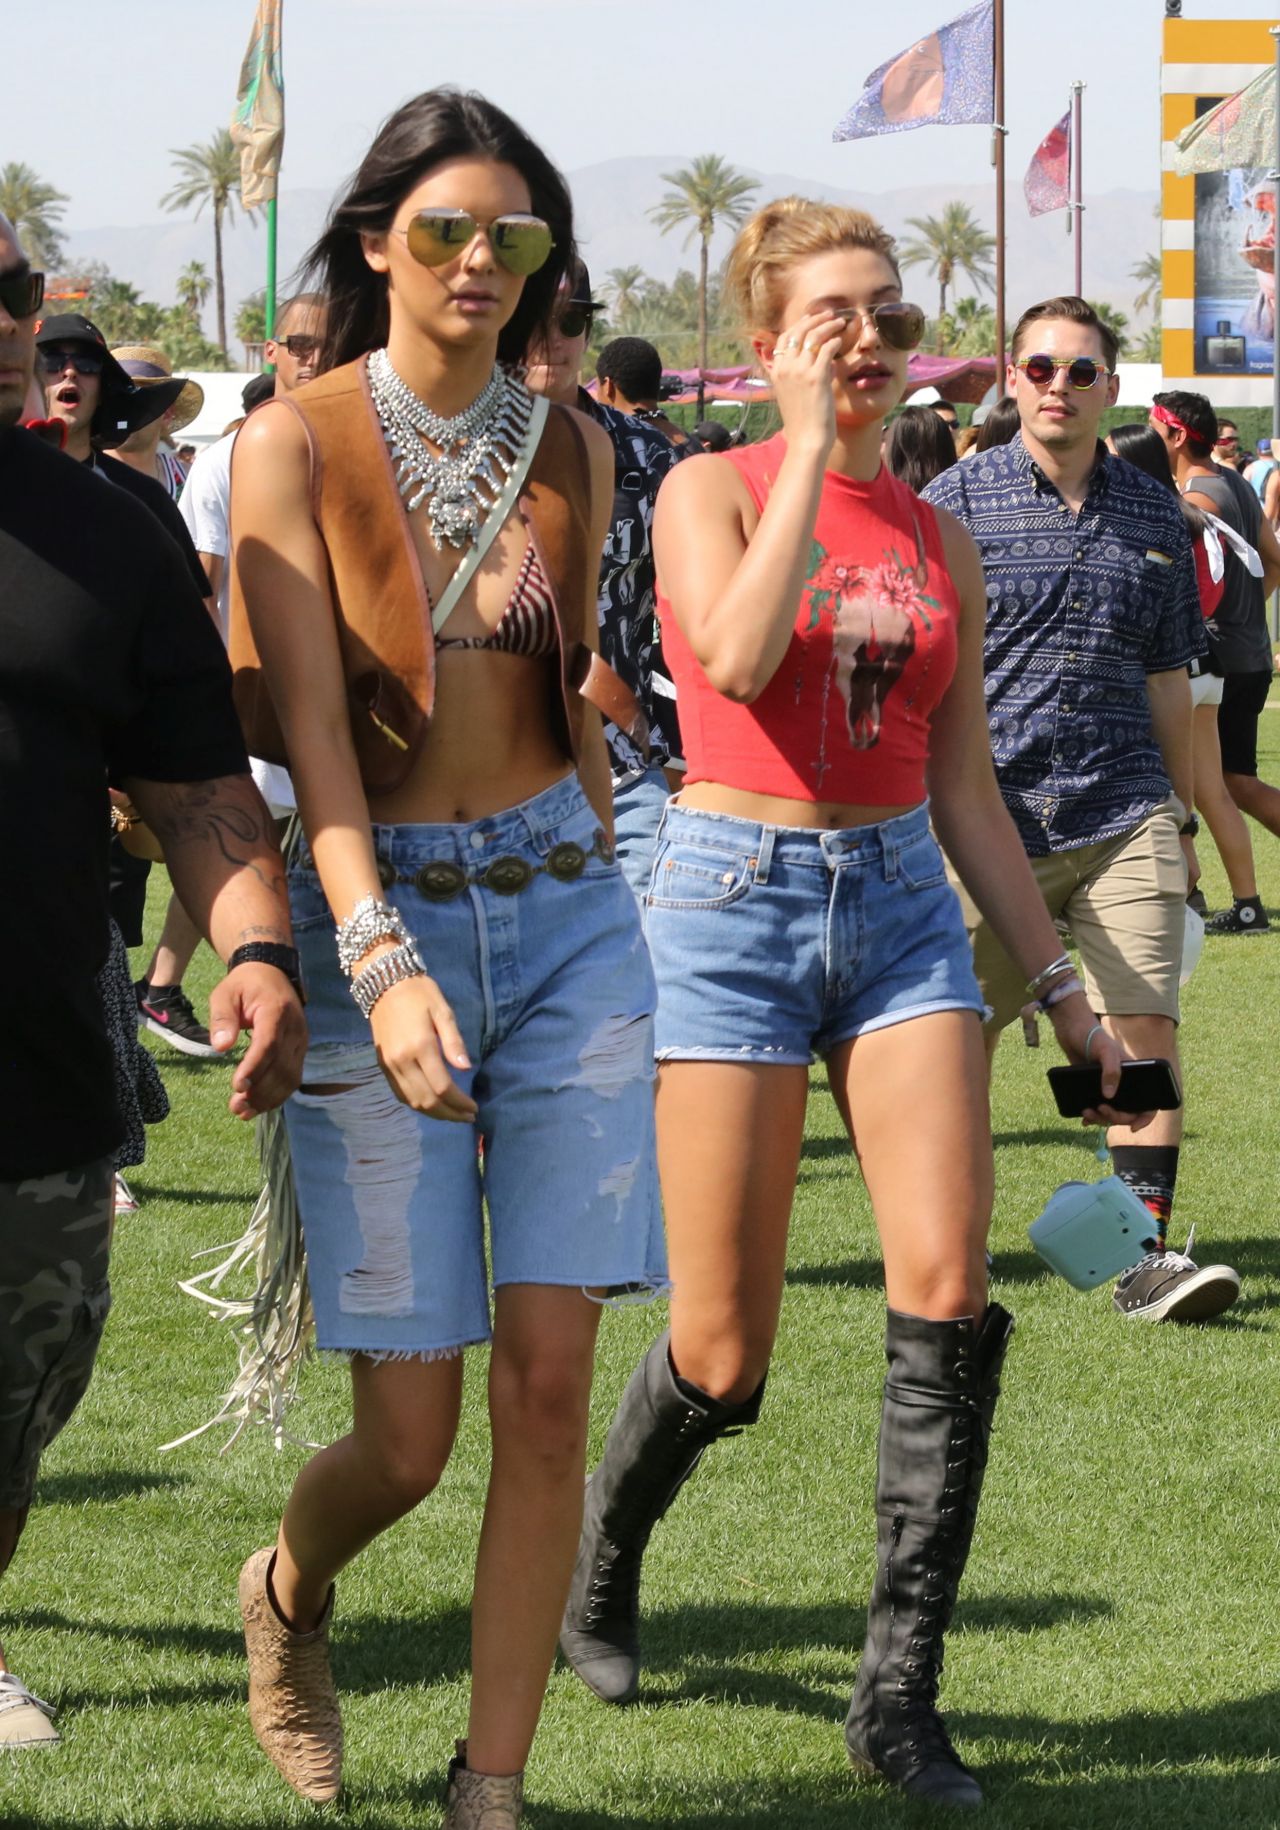 kendall-jenner-and-hailey-baldwin-2015-coachella-valley-music-and-arts-festival-in-indio_6